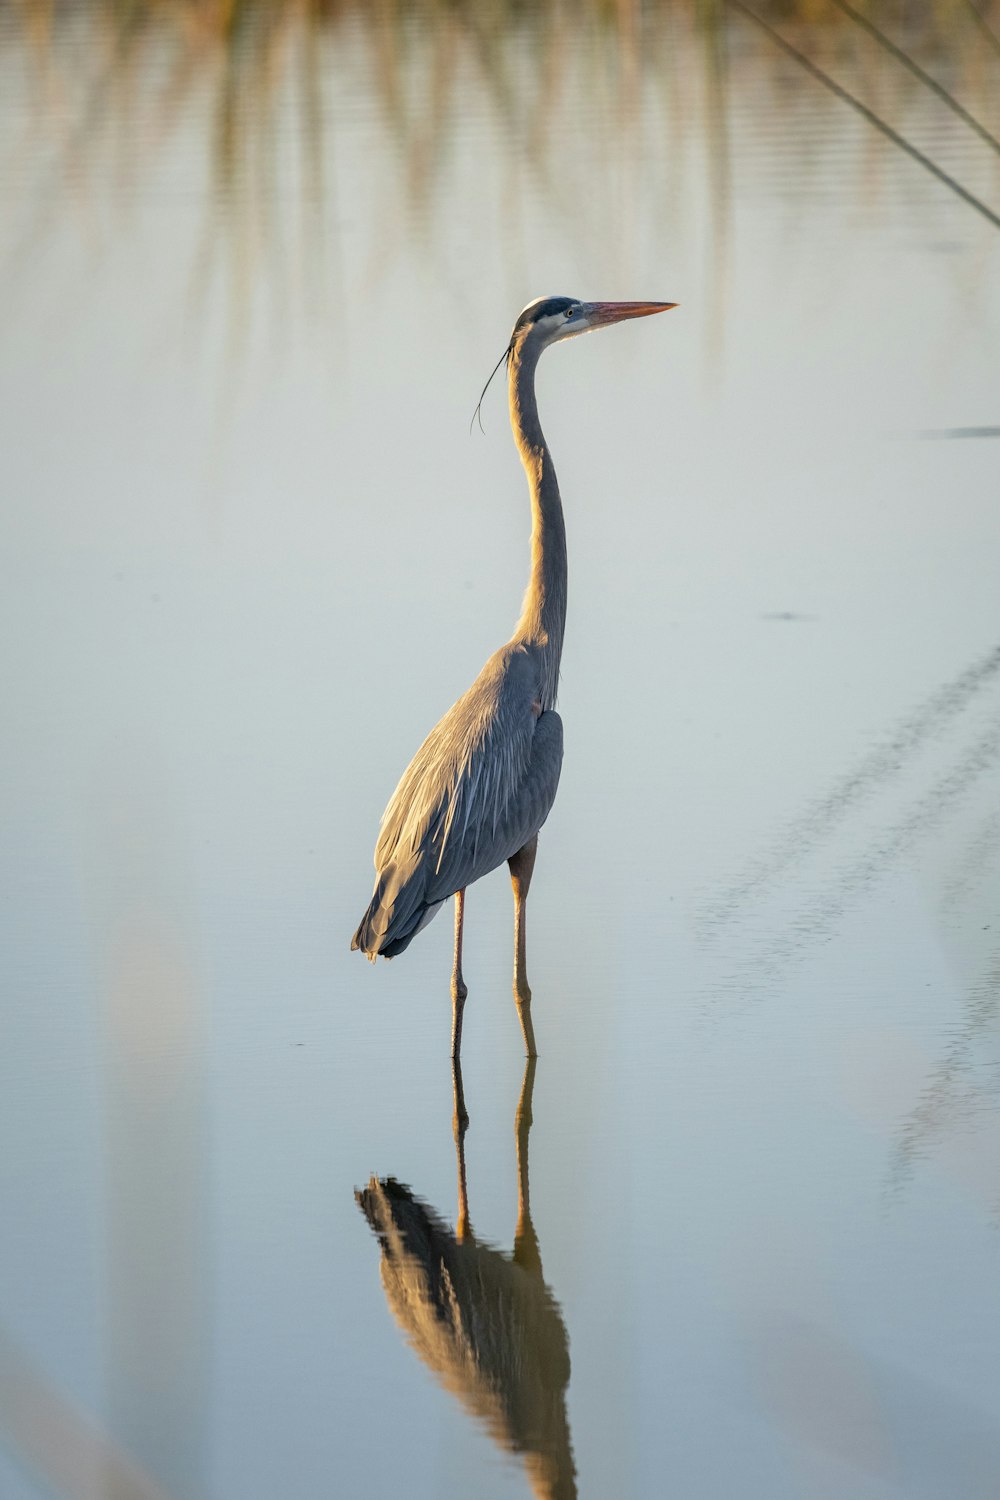 a bird is standing in the water with its reflection